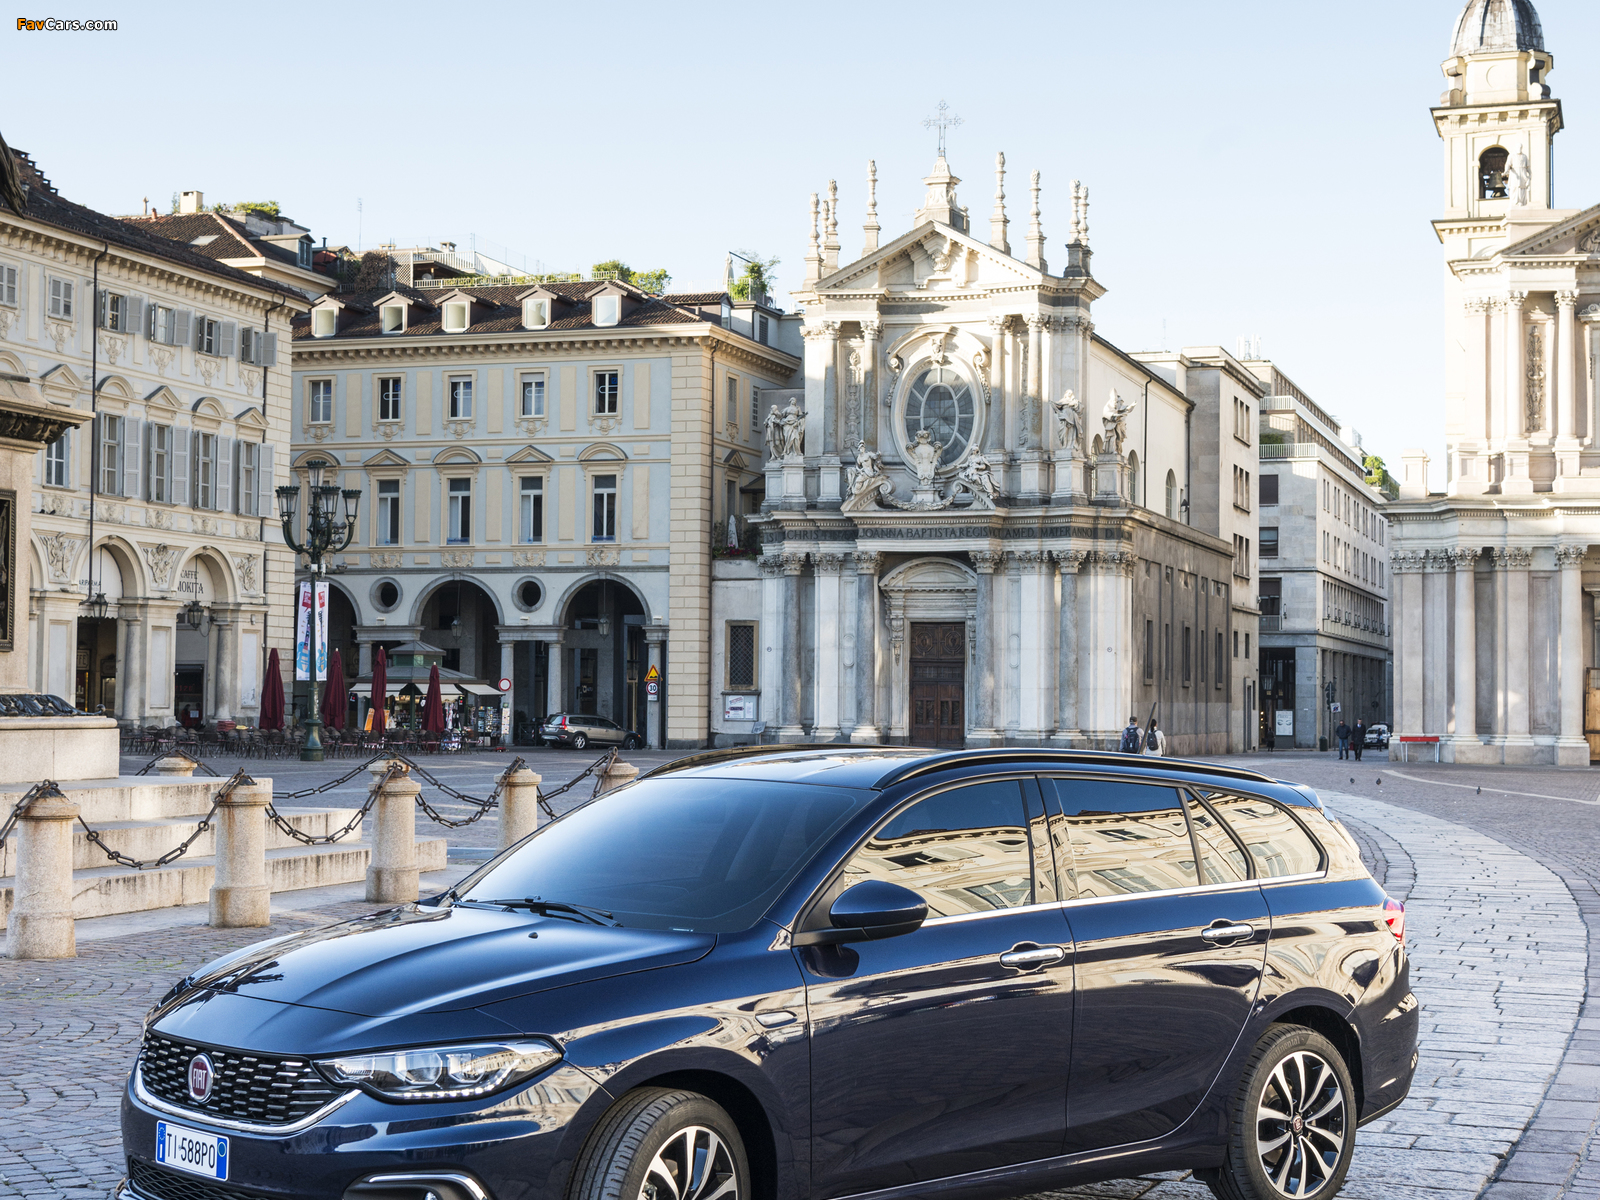 Fiat Tipo Station Wagon (357) 2016 images (1600 x 1200)